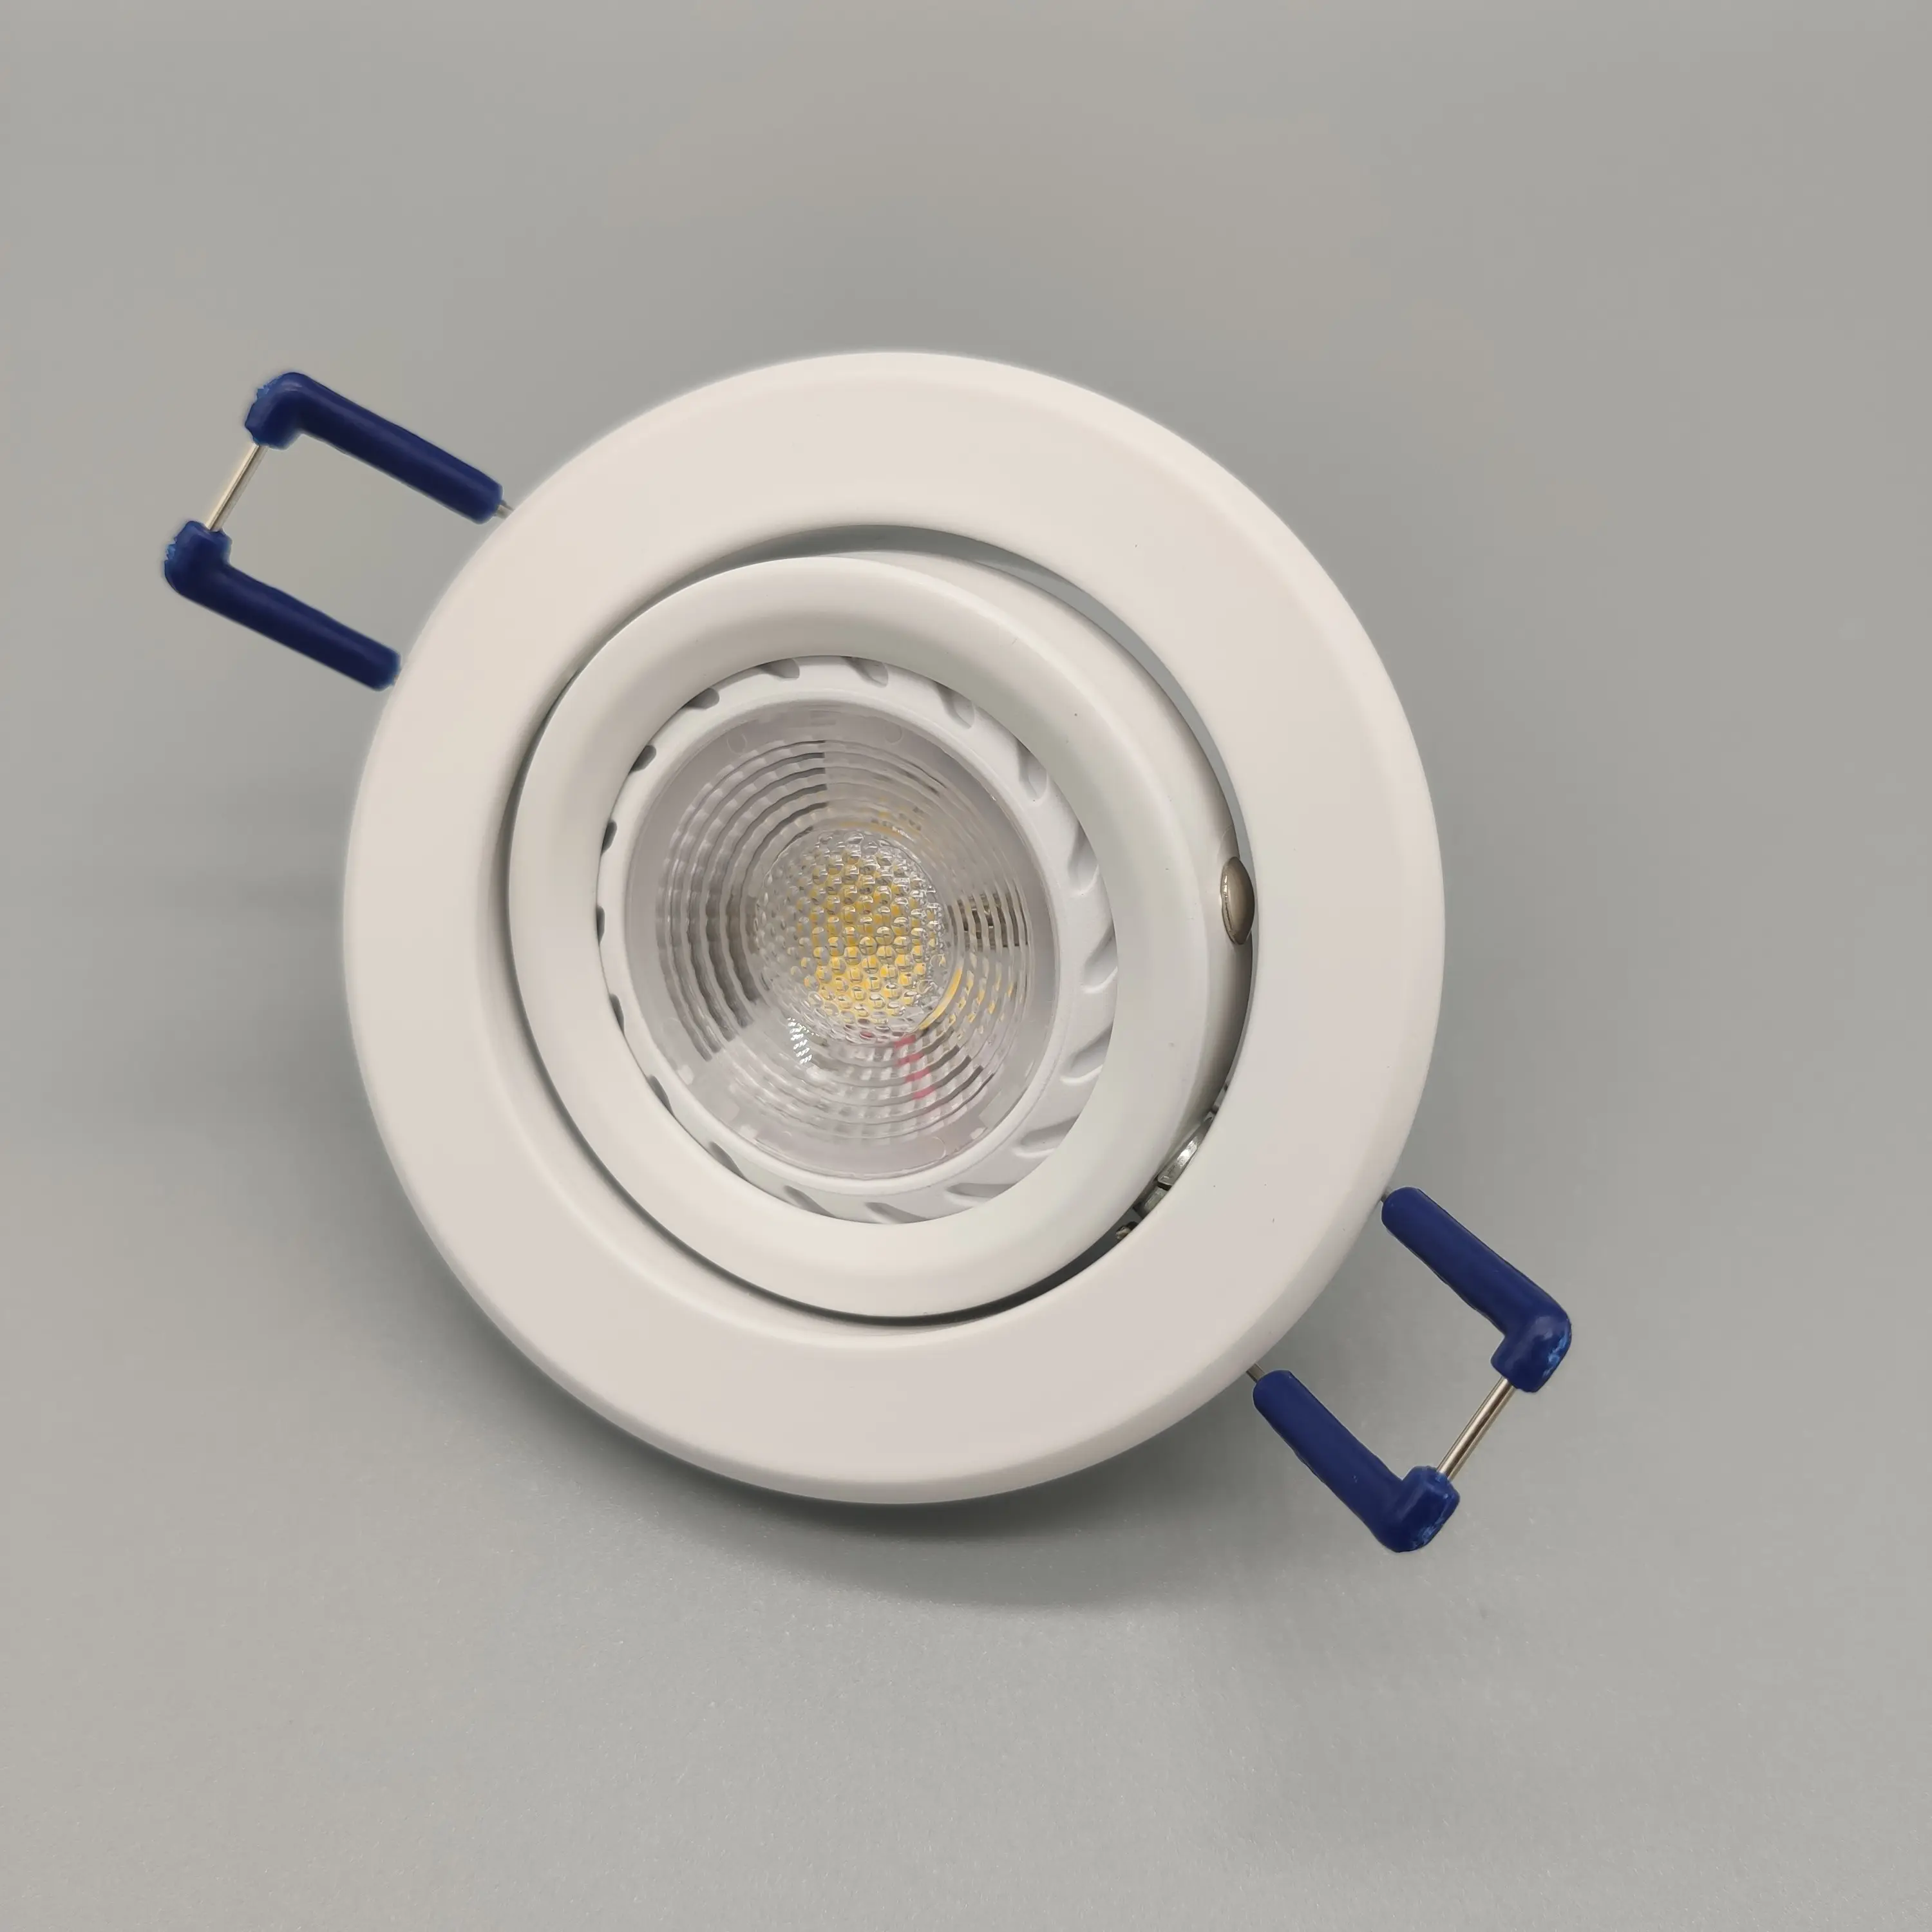 COB LED MR16 Downlight Lamp 5W MR16 Module downlight with 2 years warranty